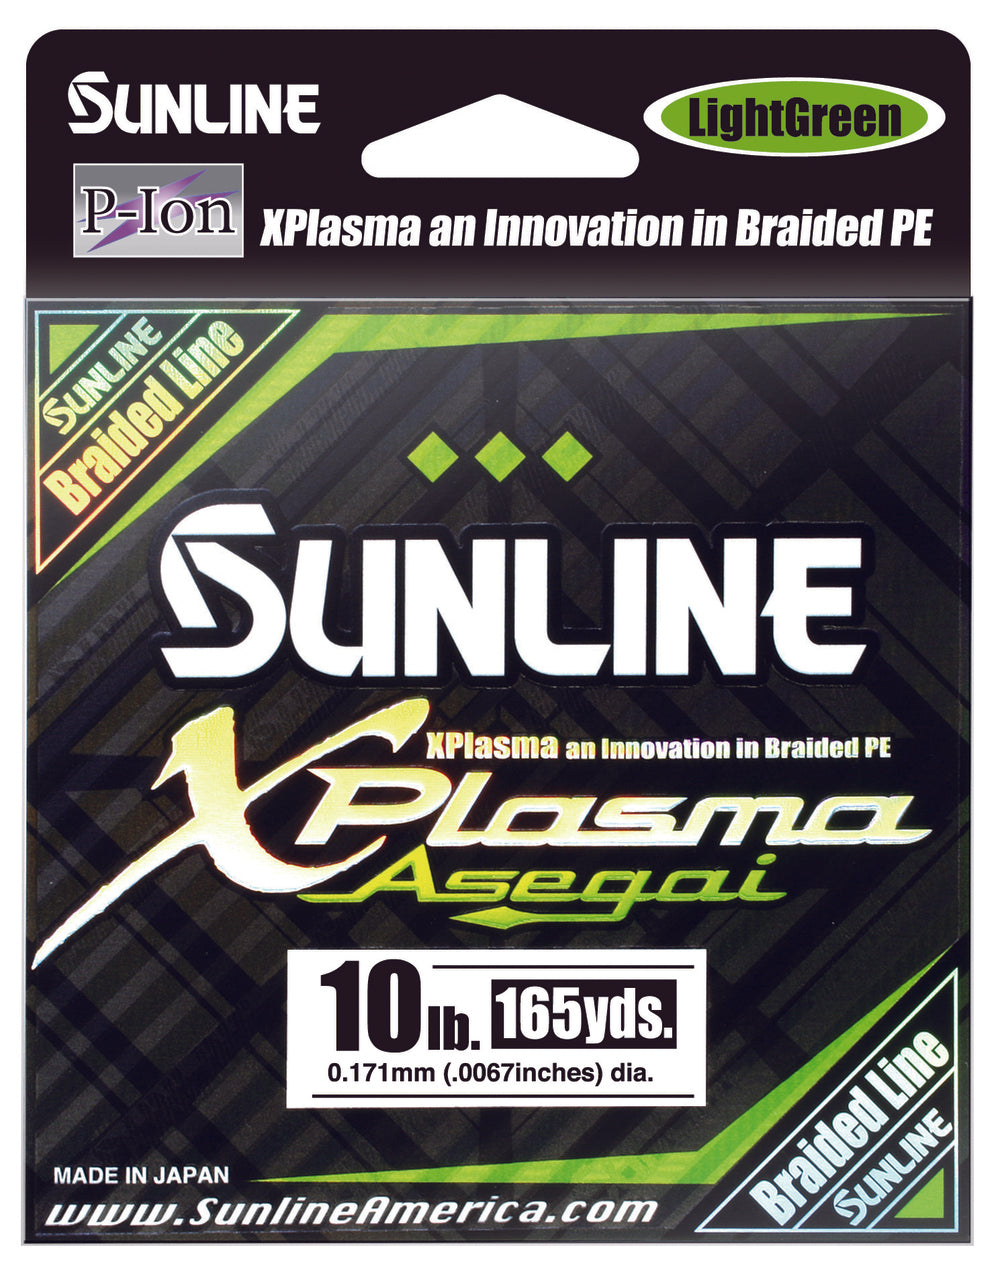 Got questions about Sunline braided line? Kyle Welcher Fishing has